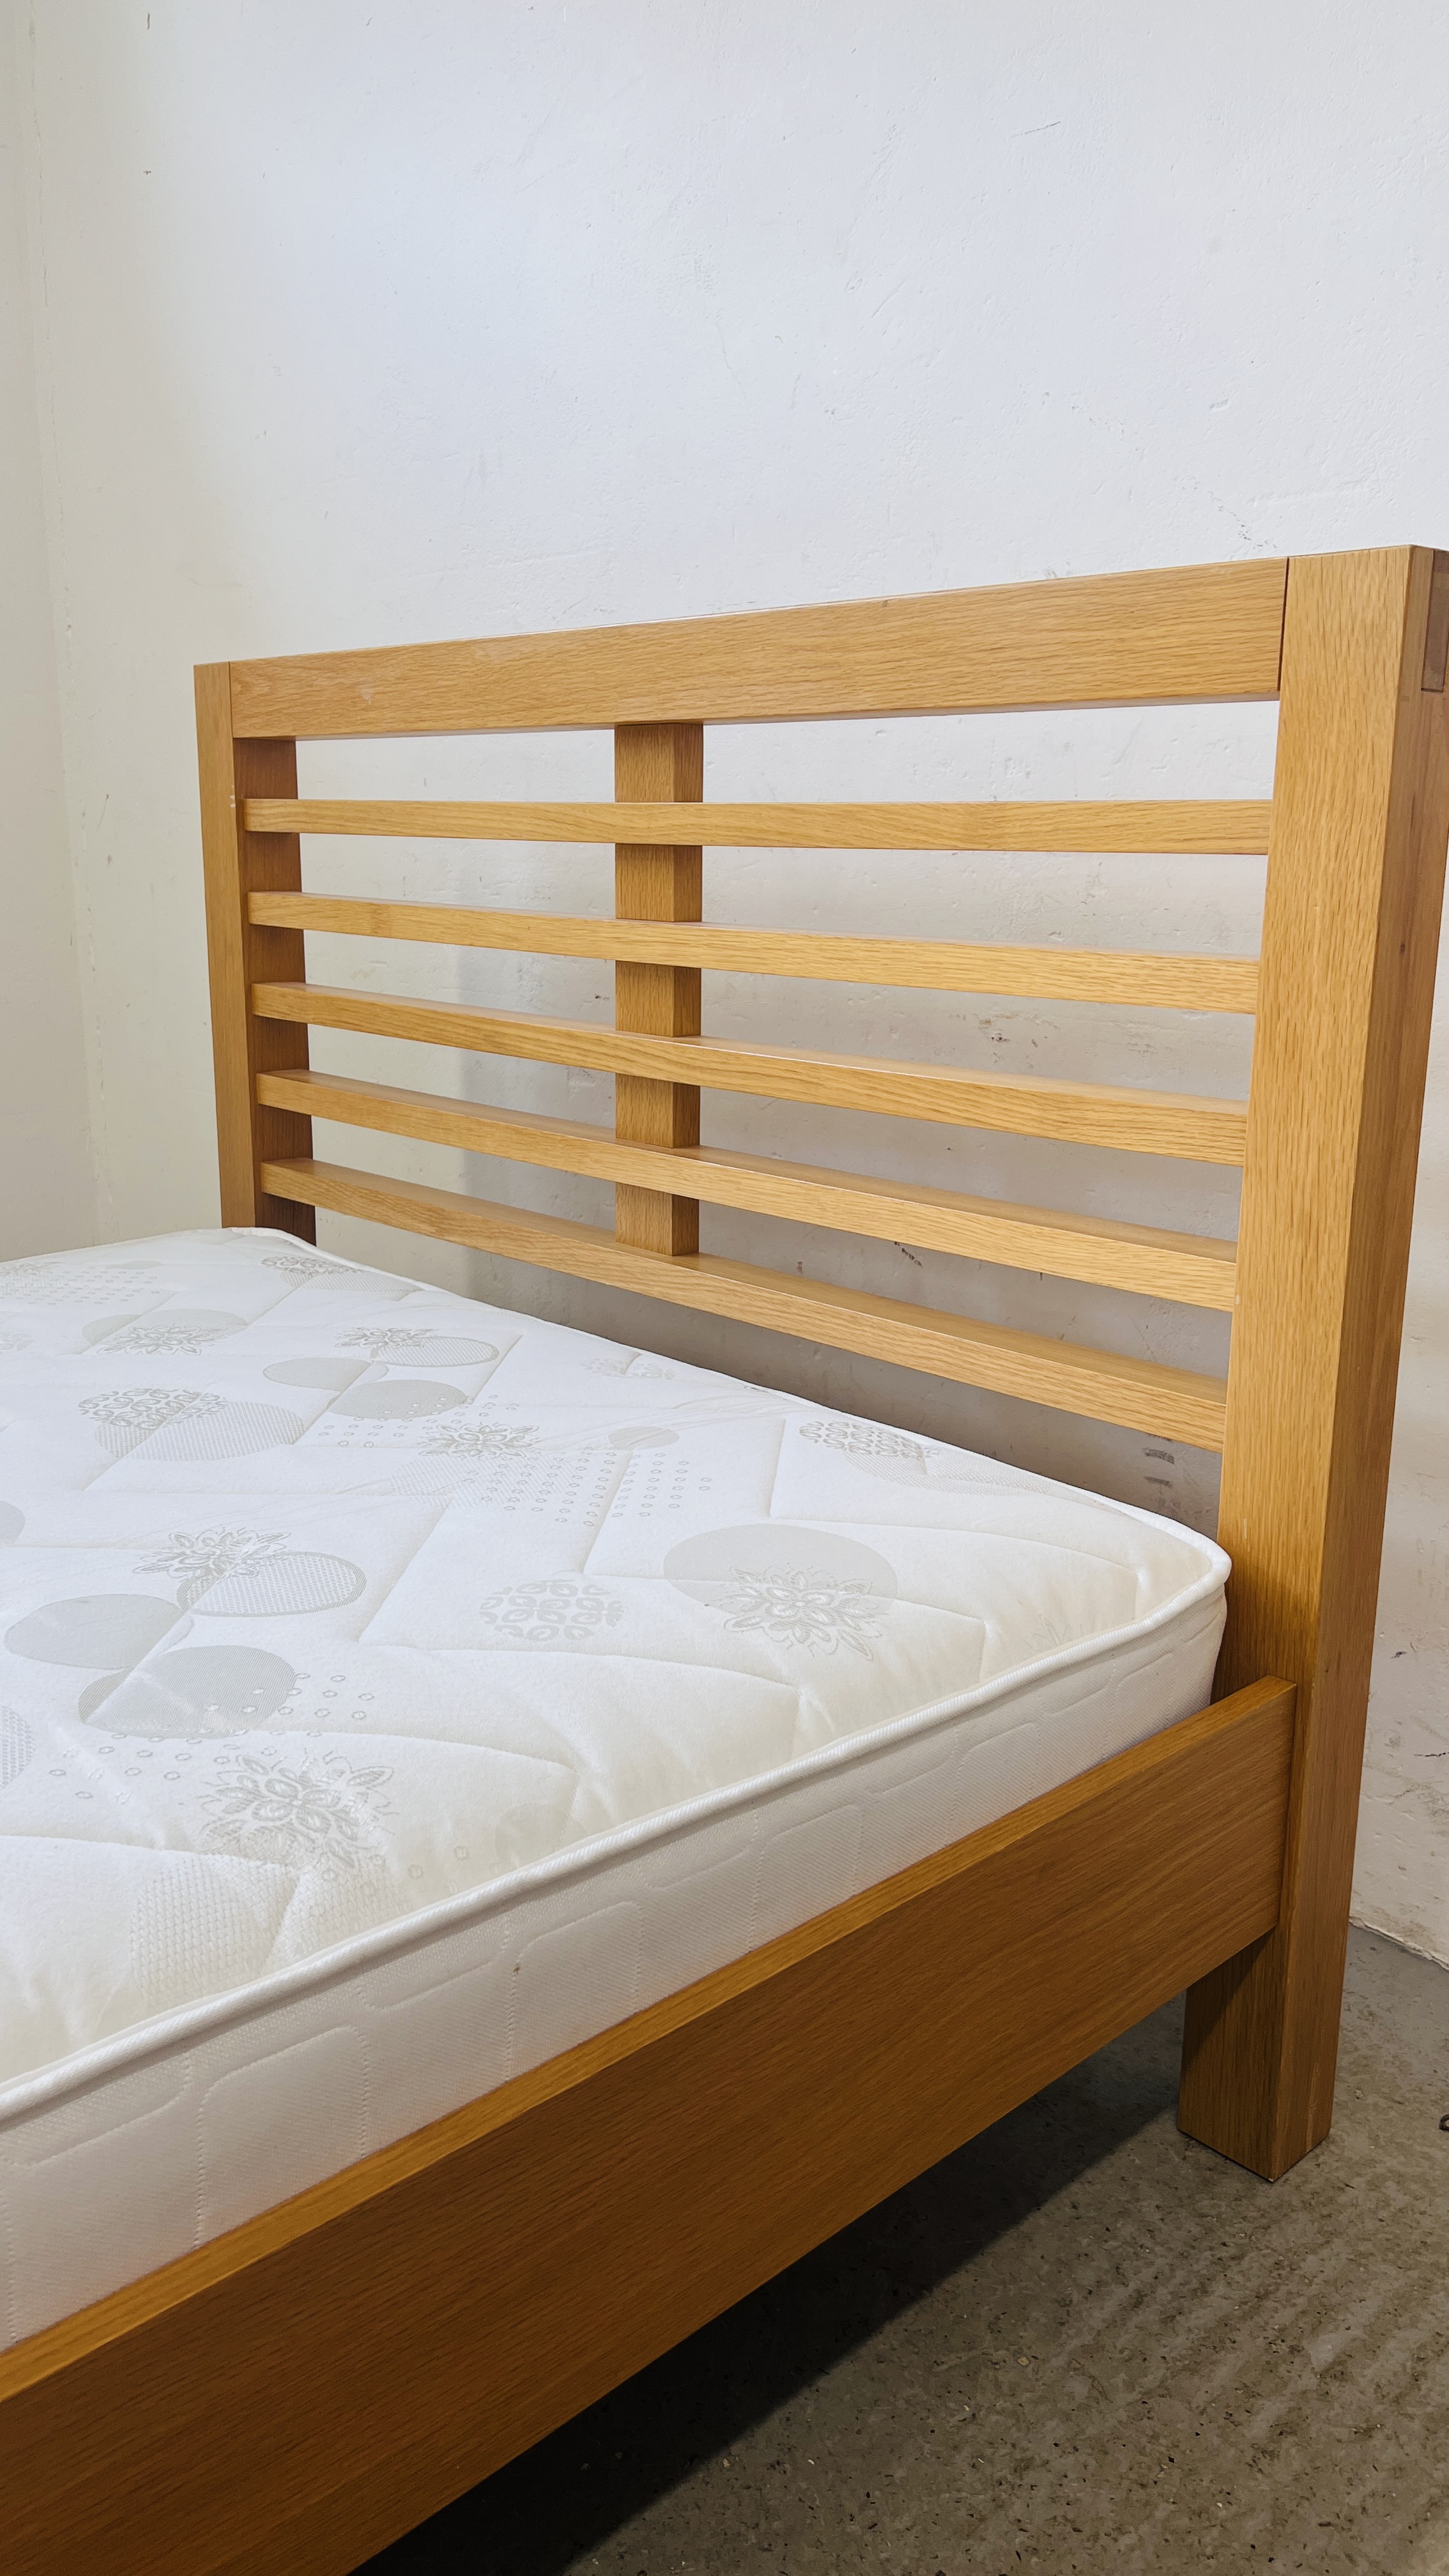 MODERN BEECHWOOD FINISH DOUBLE BEDSTEAD COMPLETE WITH ORTHO MATTRESS - Image 4 of 12